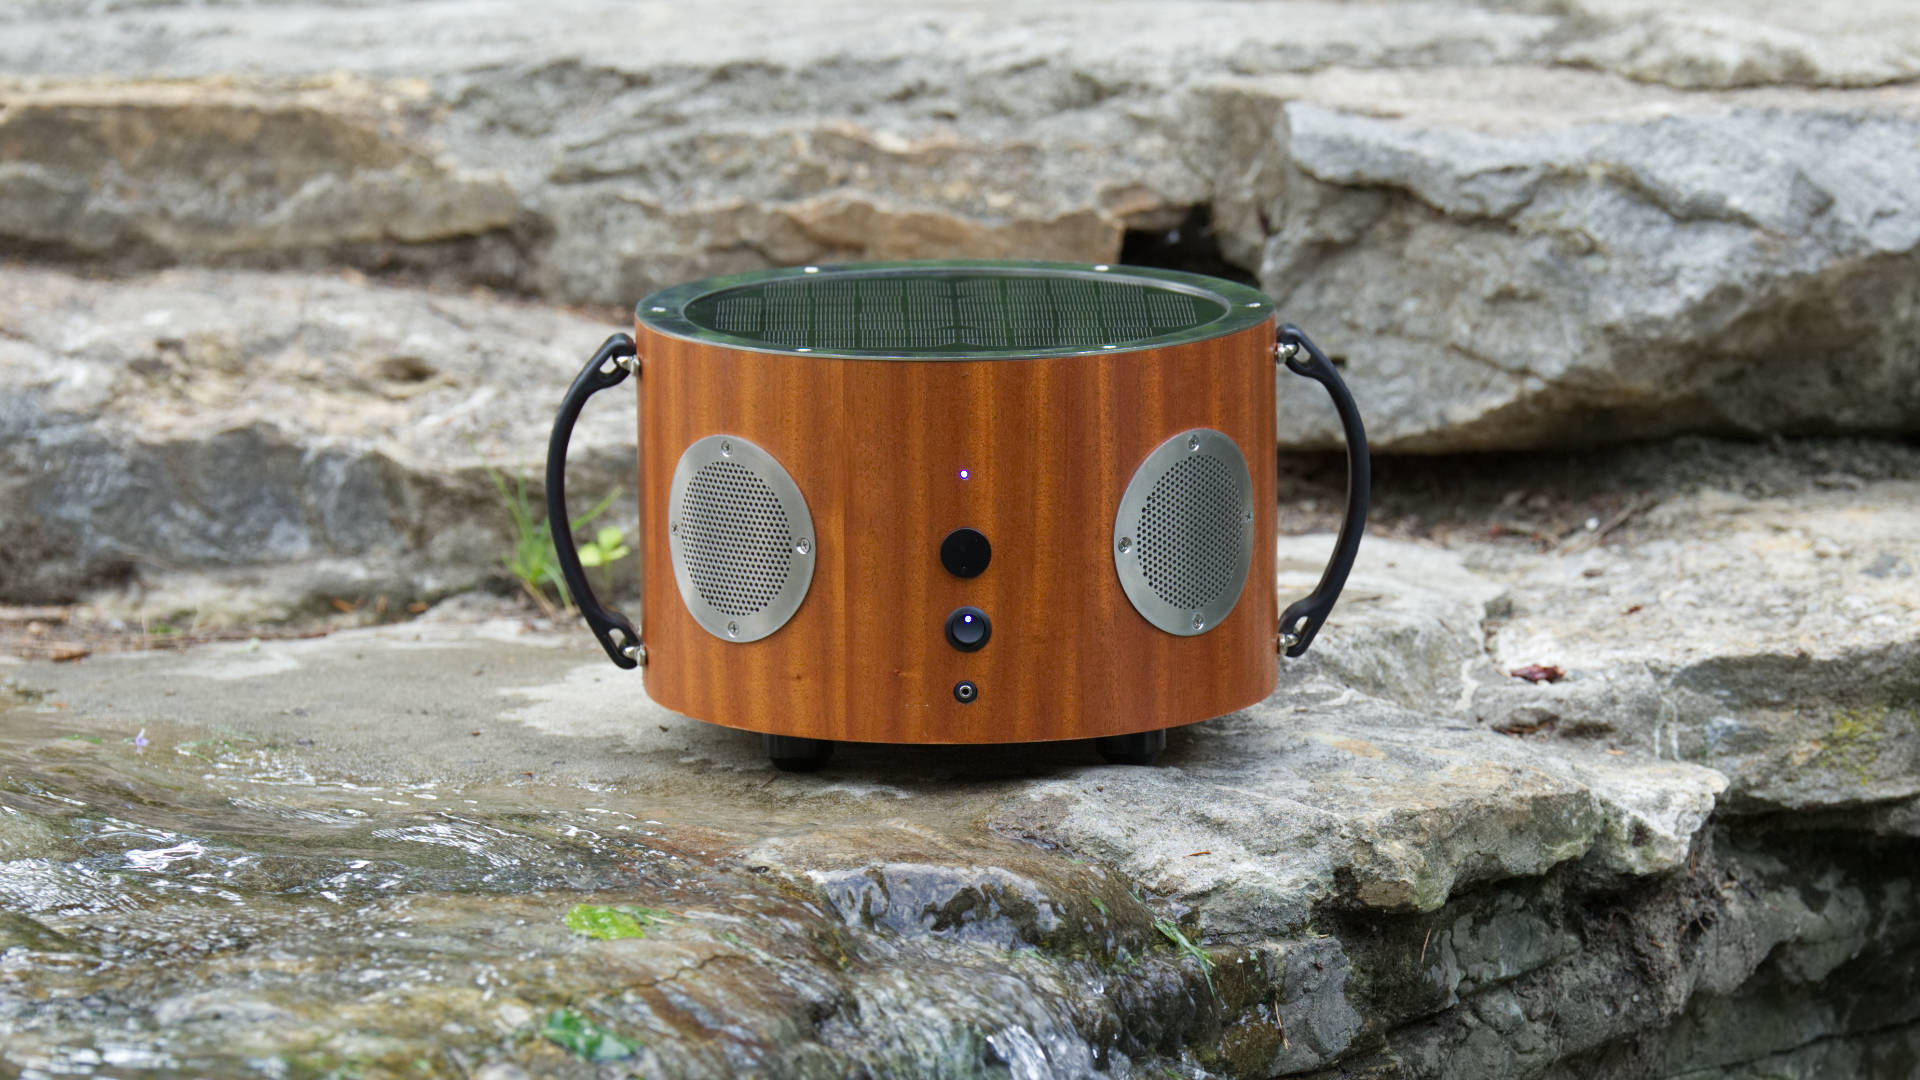 Sunny is a Water Resistant Speaker made by SoularSound